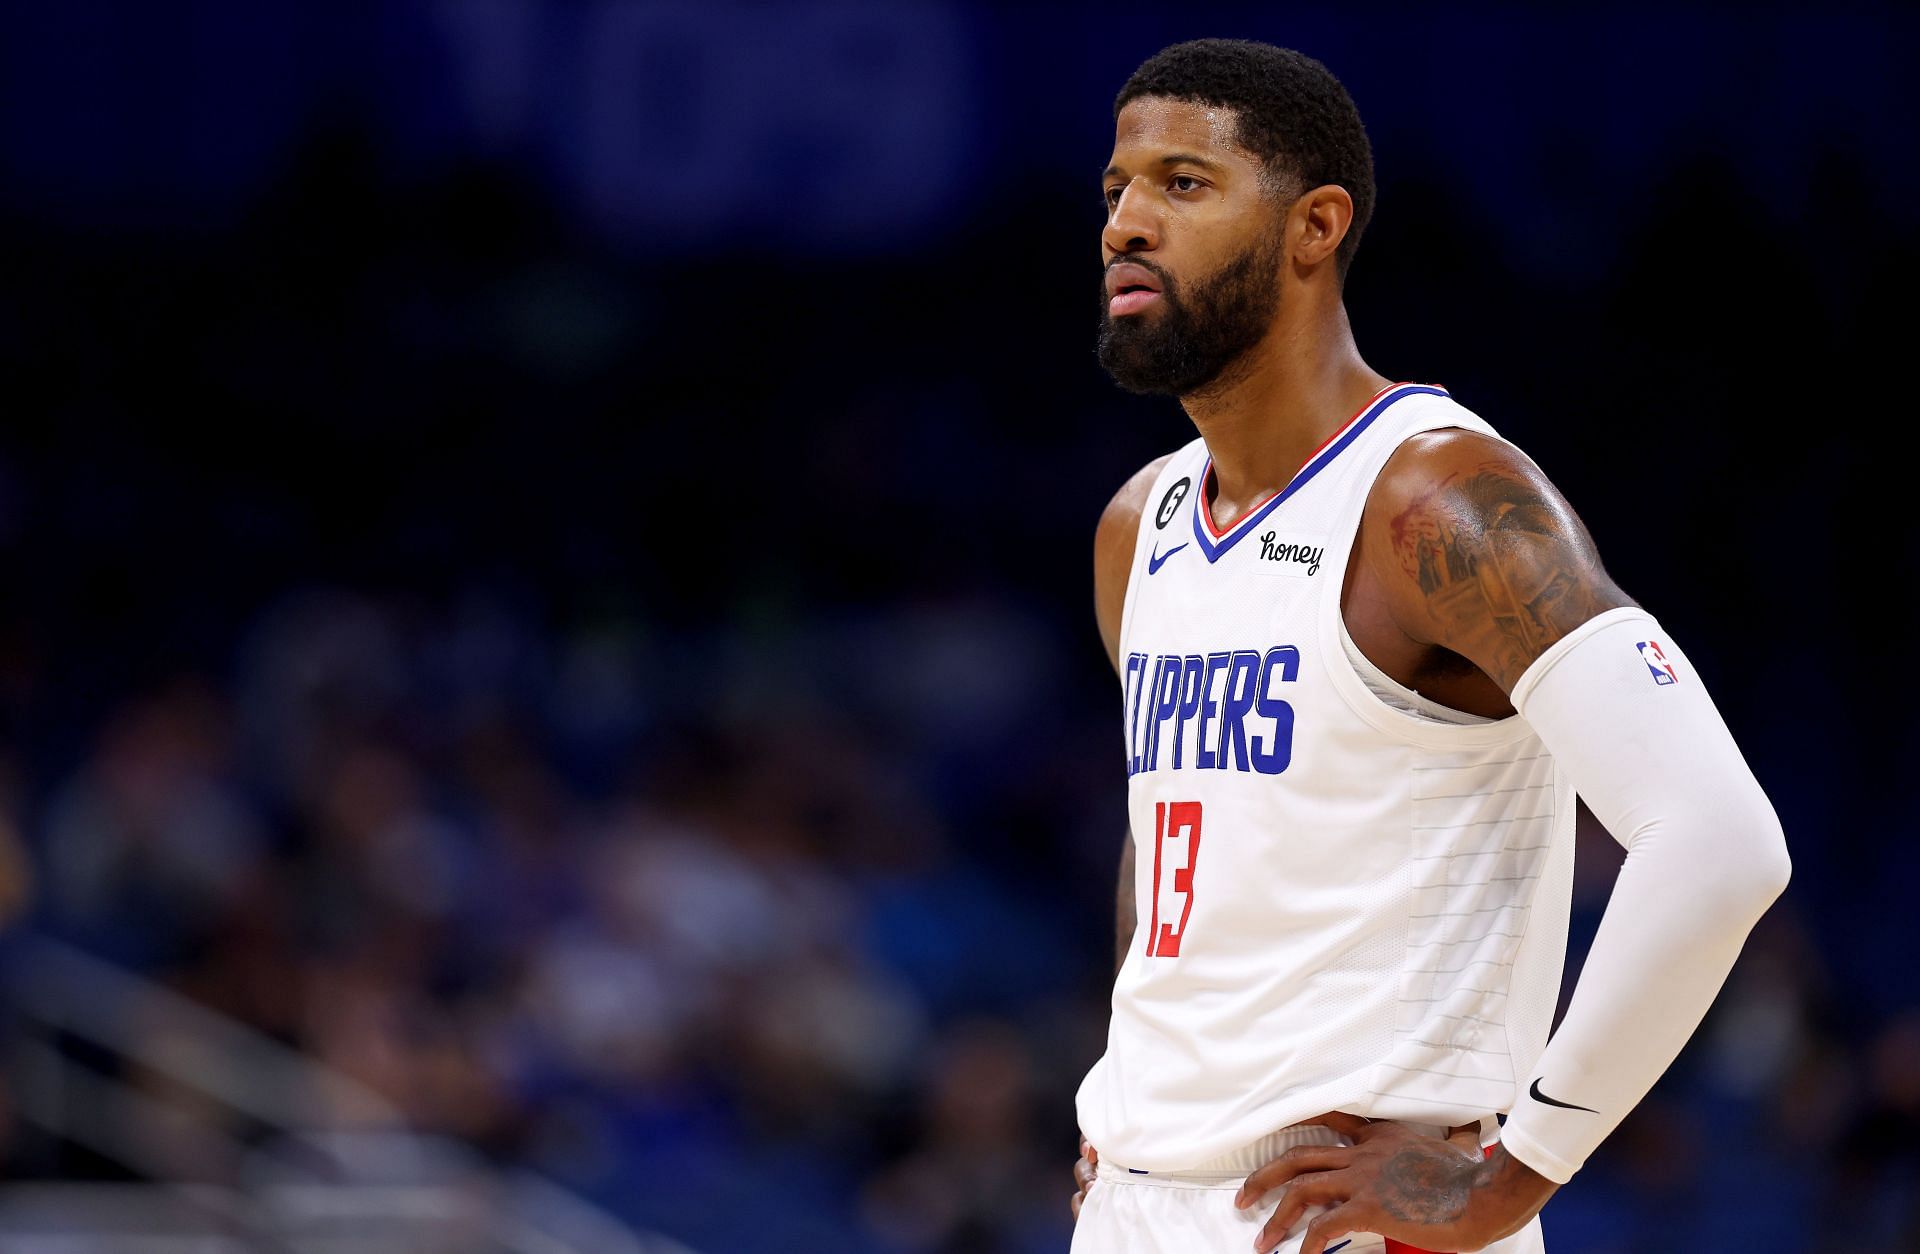 The Clippers star suffered a hamstring injury earlier in the season (Image via Getty Images)